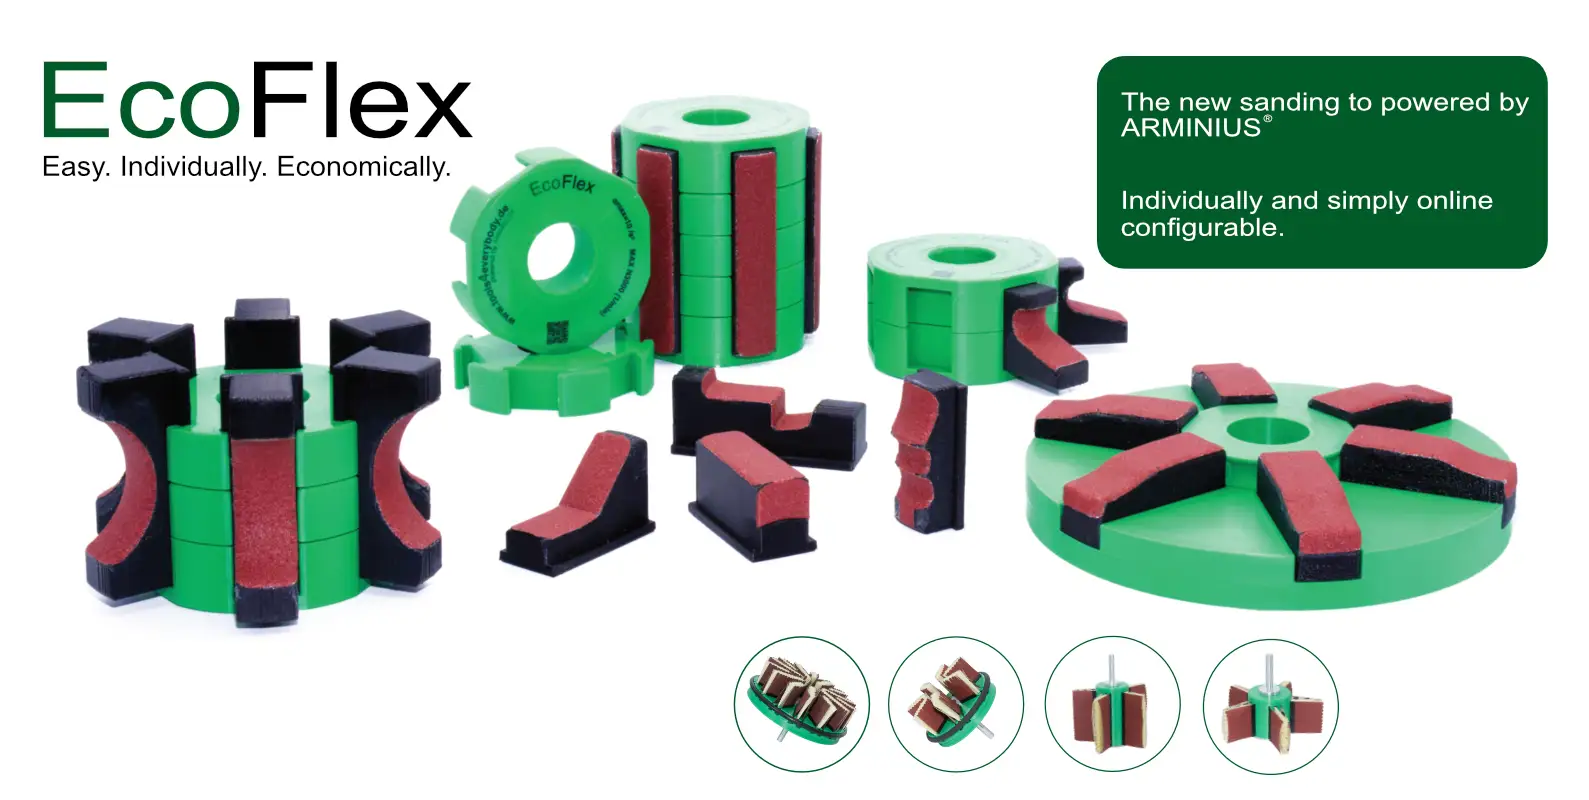 EcoFlex – the innovative and flexible sanding tool for woodworking